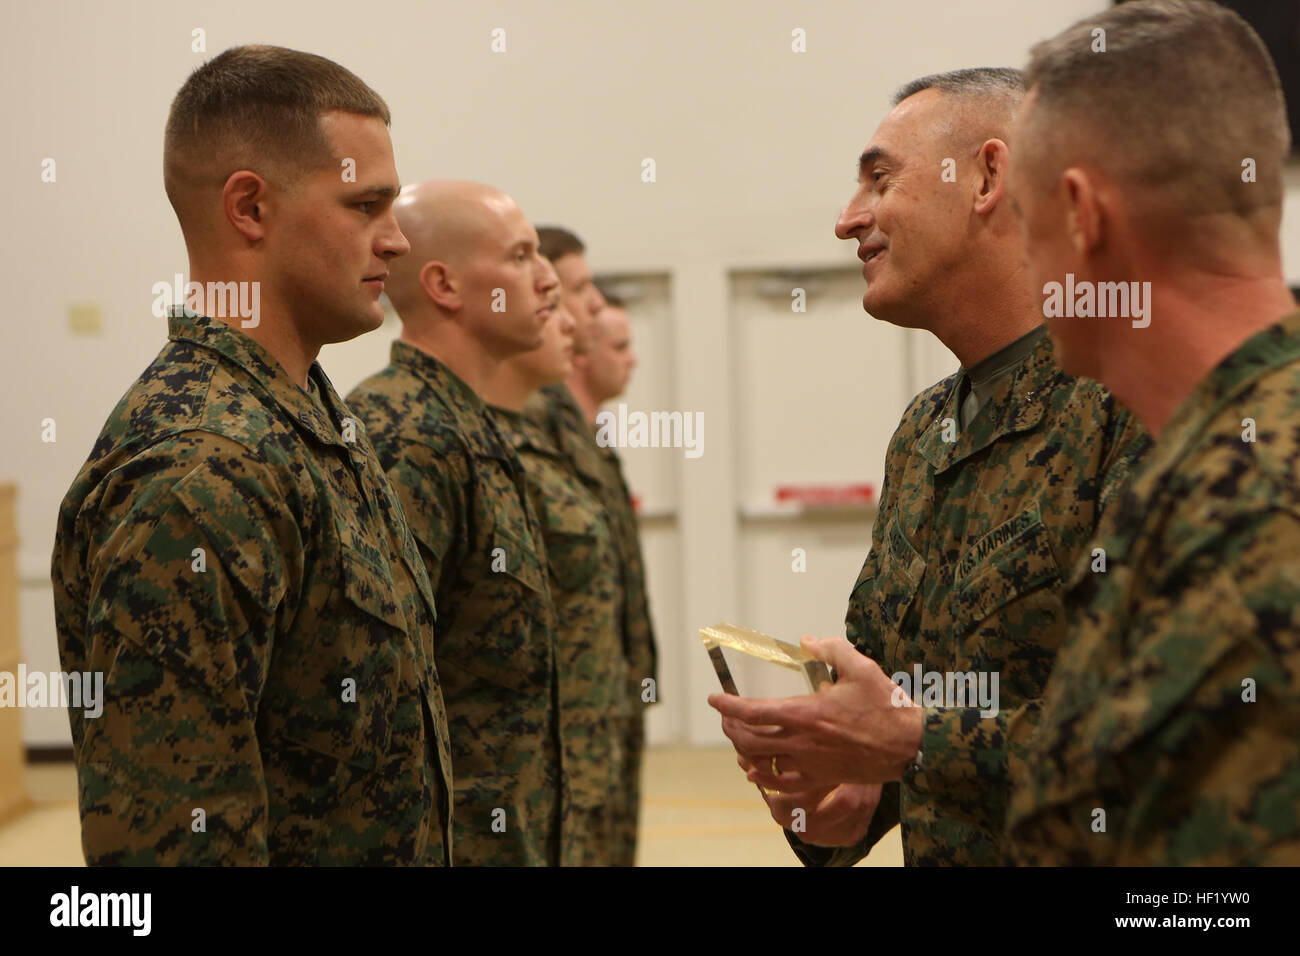 Brigadier Gen. James W. Lukeman, the 2nd Marine Division commanding general, congratulates Sgt. Joshua L. Moore, with 2nd Battalion, 8th Marine Regiment, 2nd Marine Division, for his accomplishment in receiving the Gunnery Sergeant John Basilone Award during the Morning Awards Ceremony Feb. 27, 2014 aboard Marine Corps Base Camp Lejeune. The award is presented to Marines who exhibit Basilone's attributes, such as courage and commitment. Marines, sailors awarded for outstanding performances 140227-M-BW898-009 Stock Photo